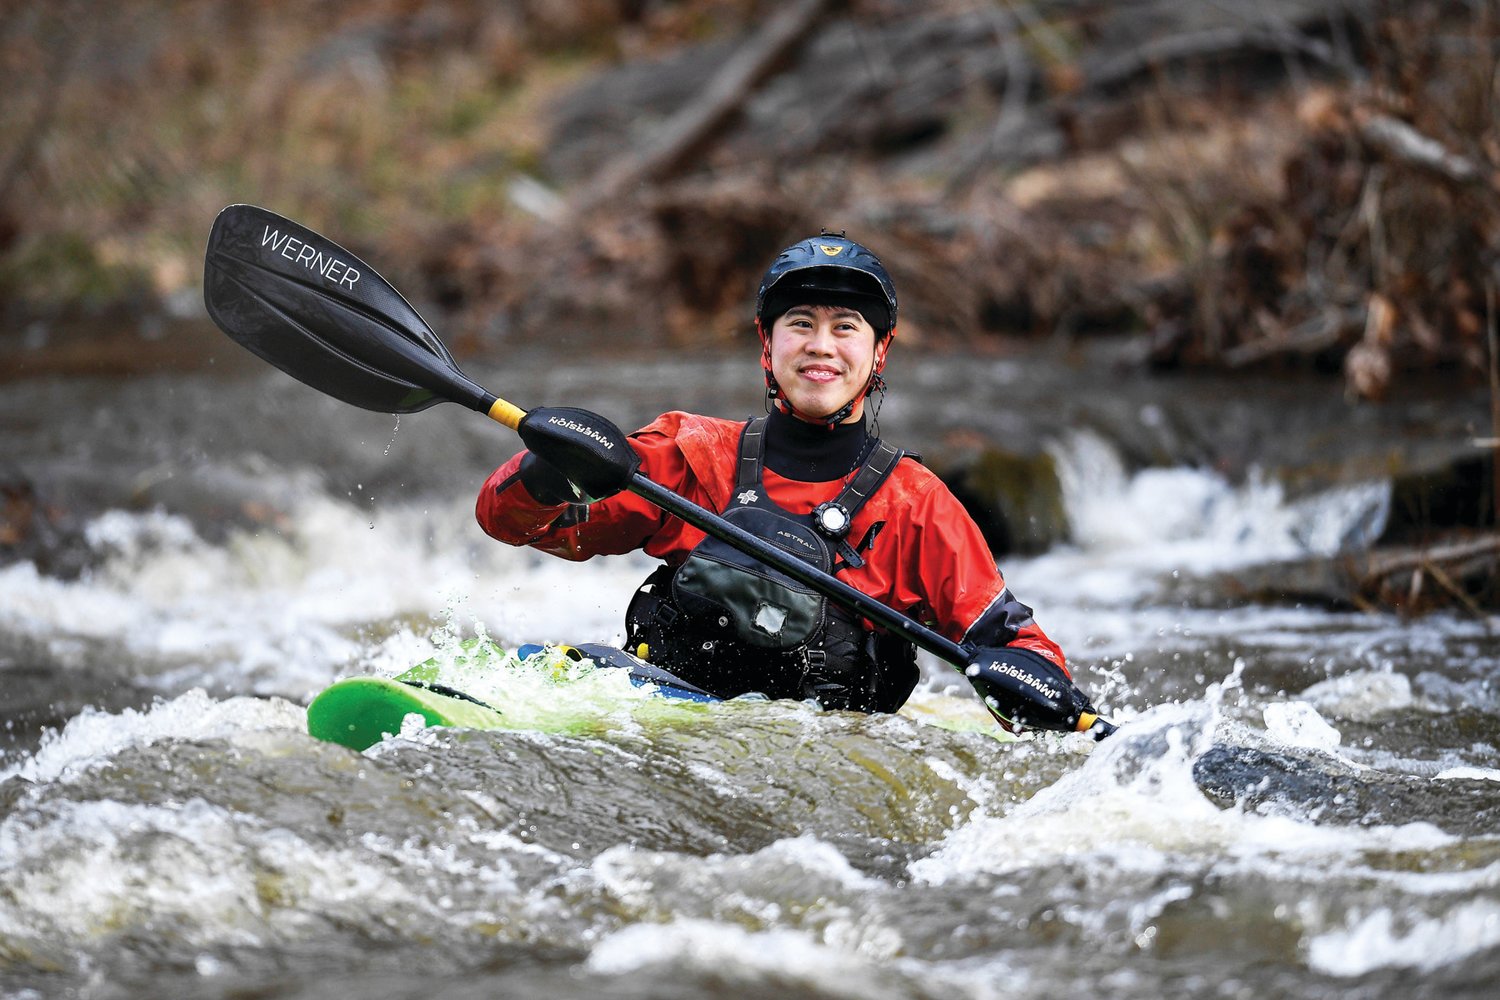 A whitewater paddling enthusiast is all smiles on the Tohickon Creek.